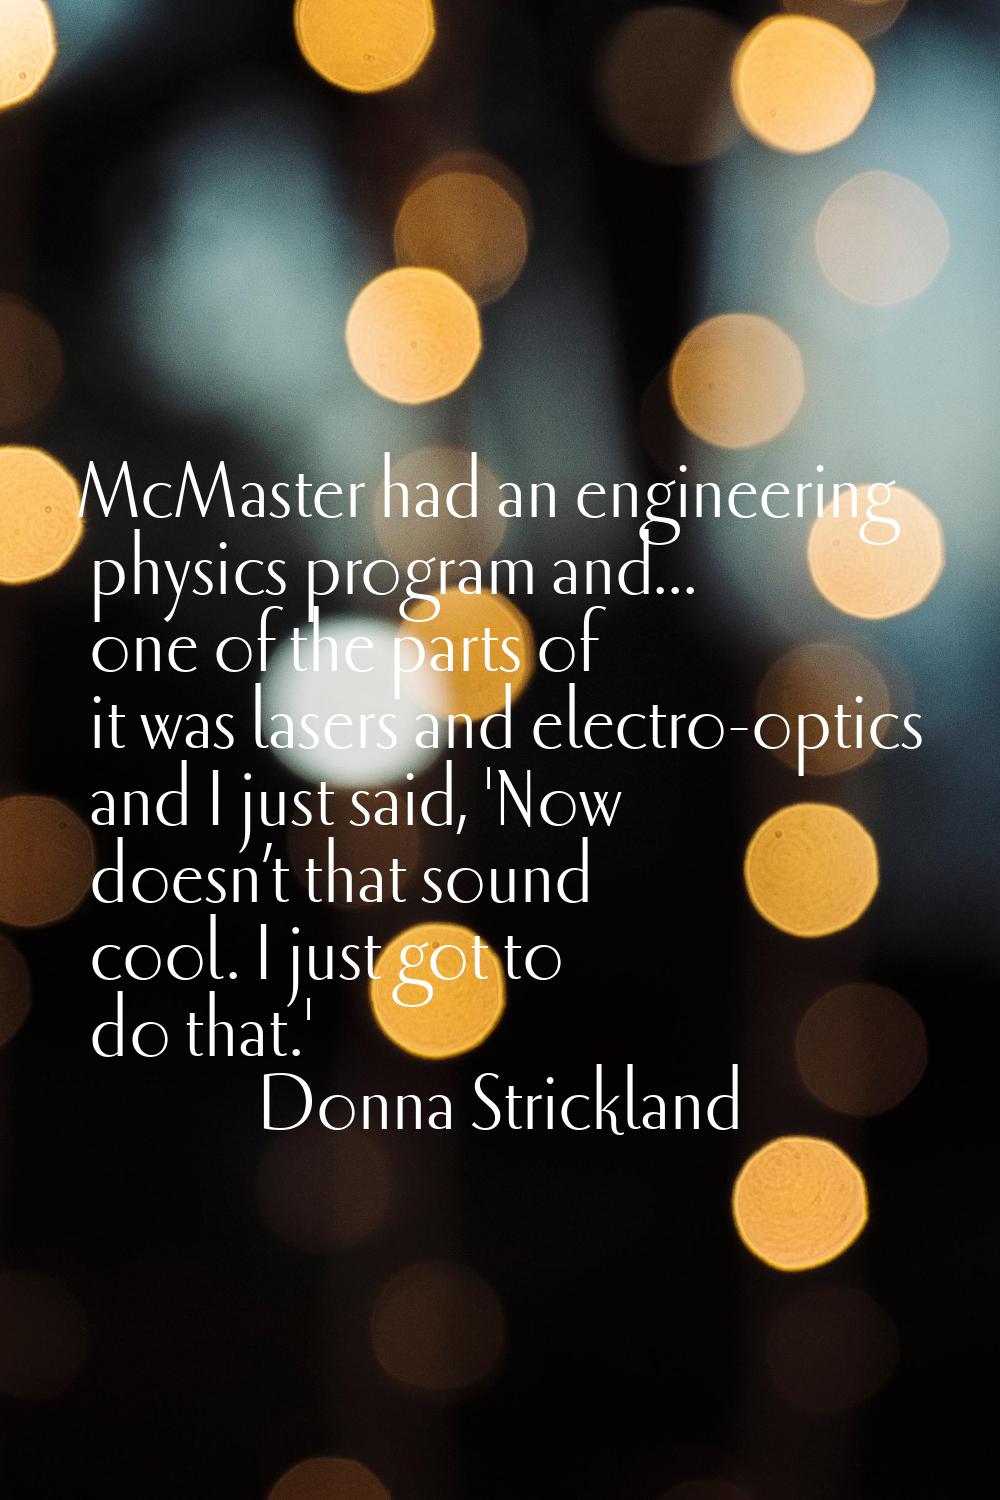 McMaster had an engineering physics program and... one of the parts of it was lasers and electro-op